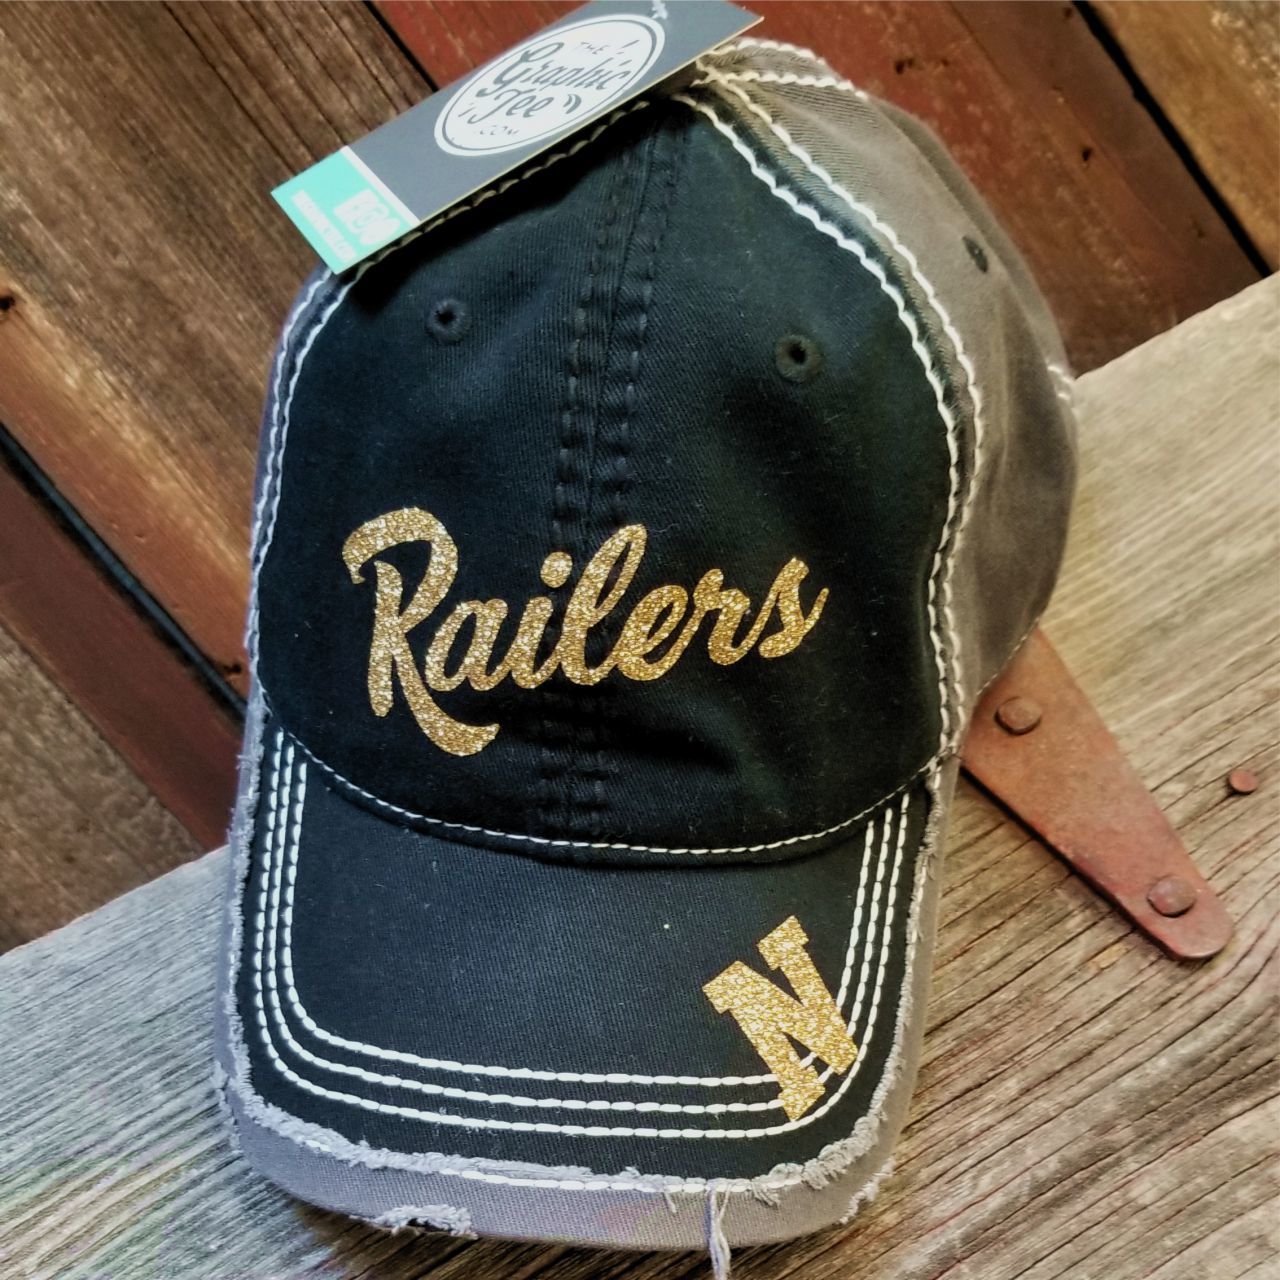 Glitter Railers - Distressed Cap - The Graphic Tee